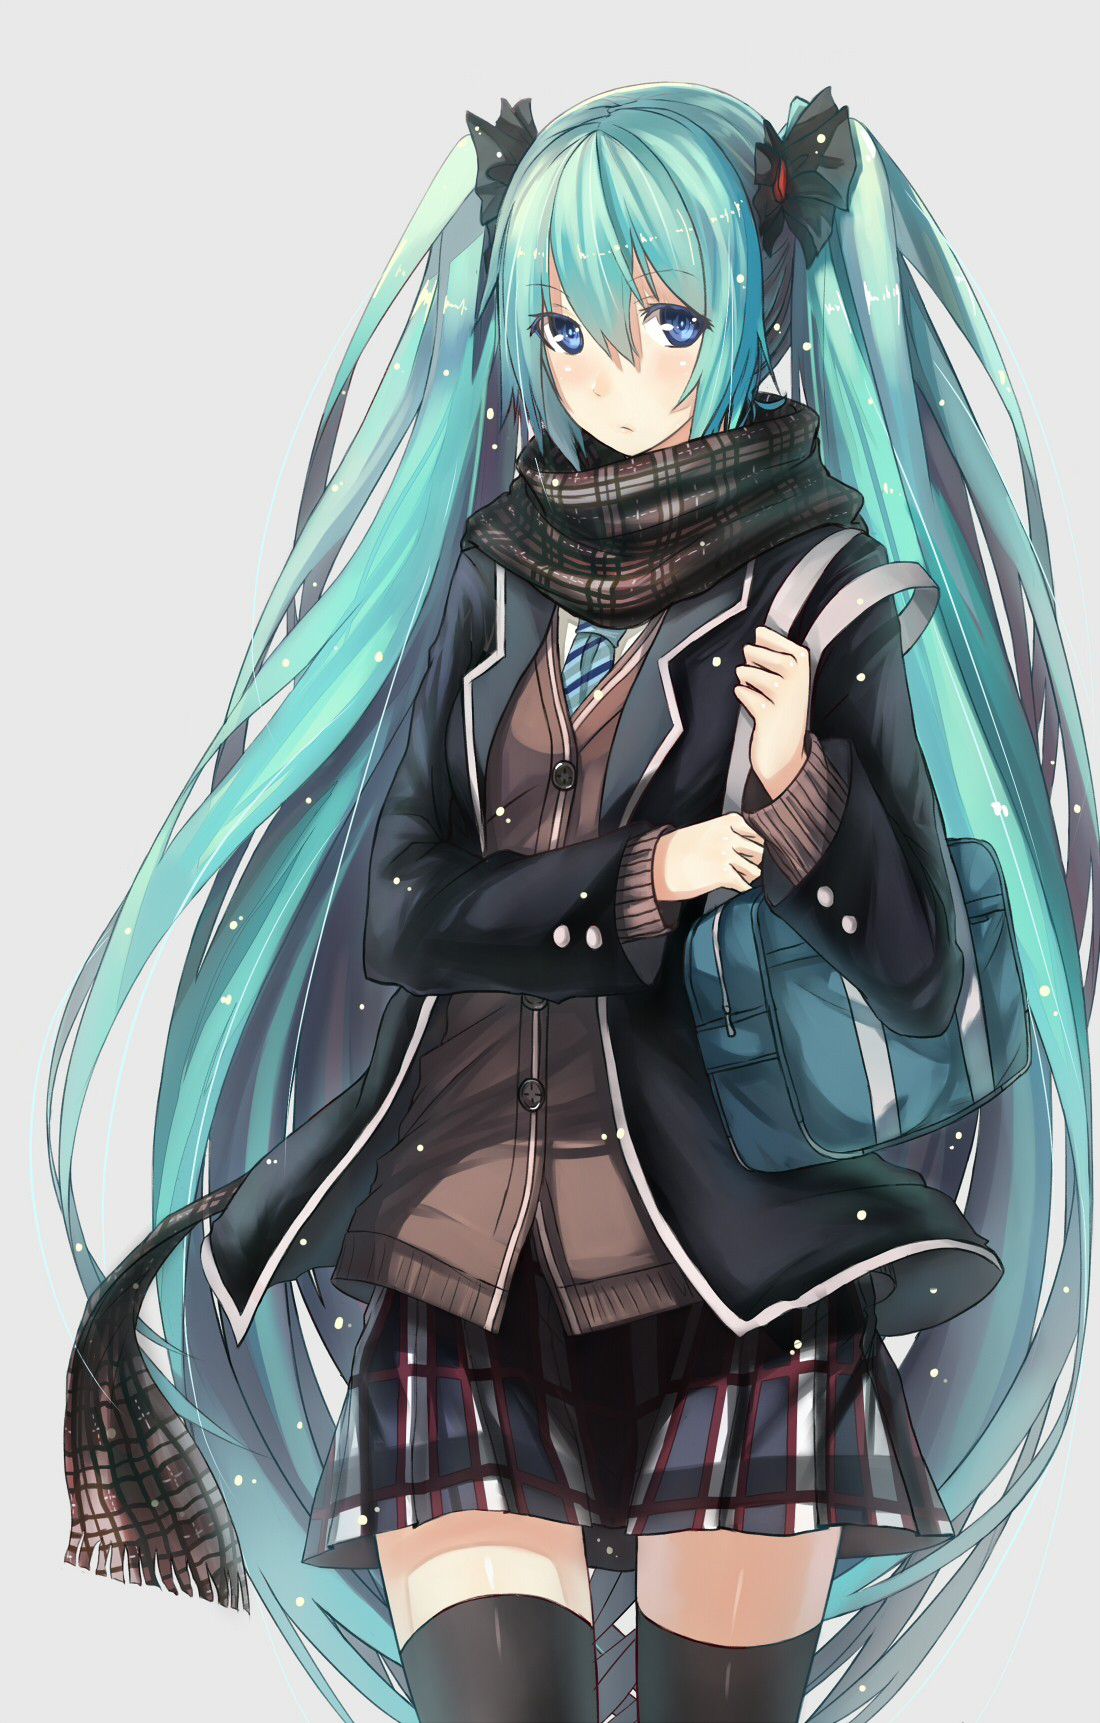 [Secondary] [VOCALOID] want to see images of miku dressed in school uniform! 3 11